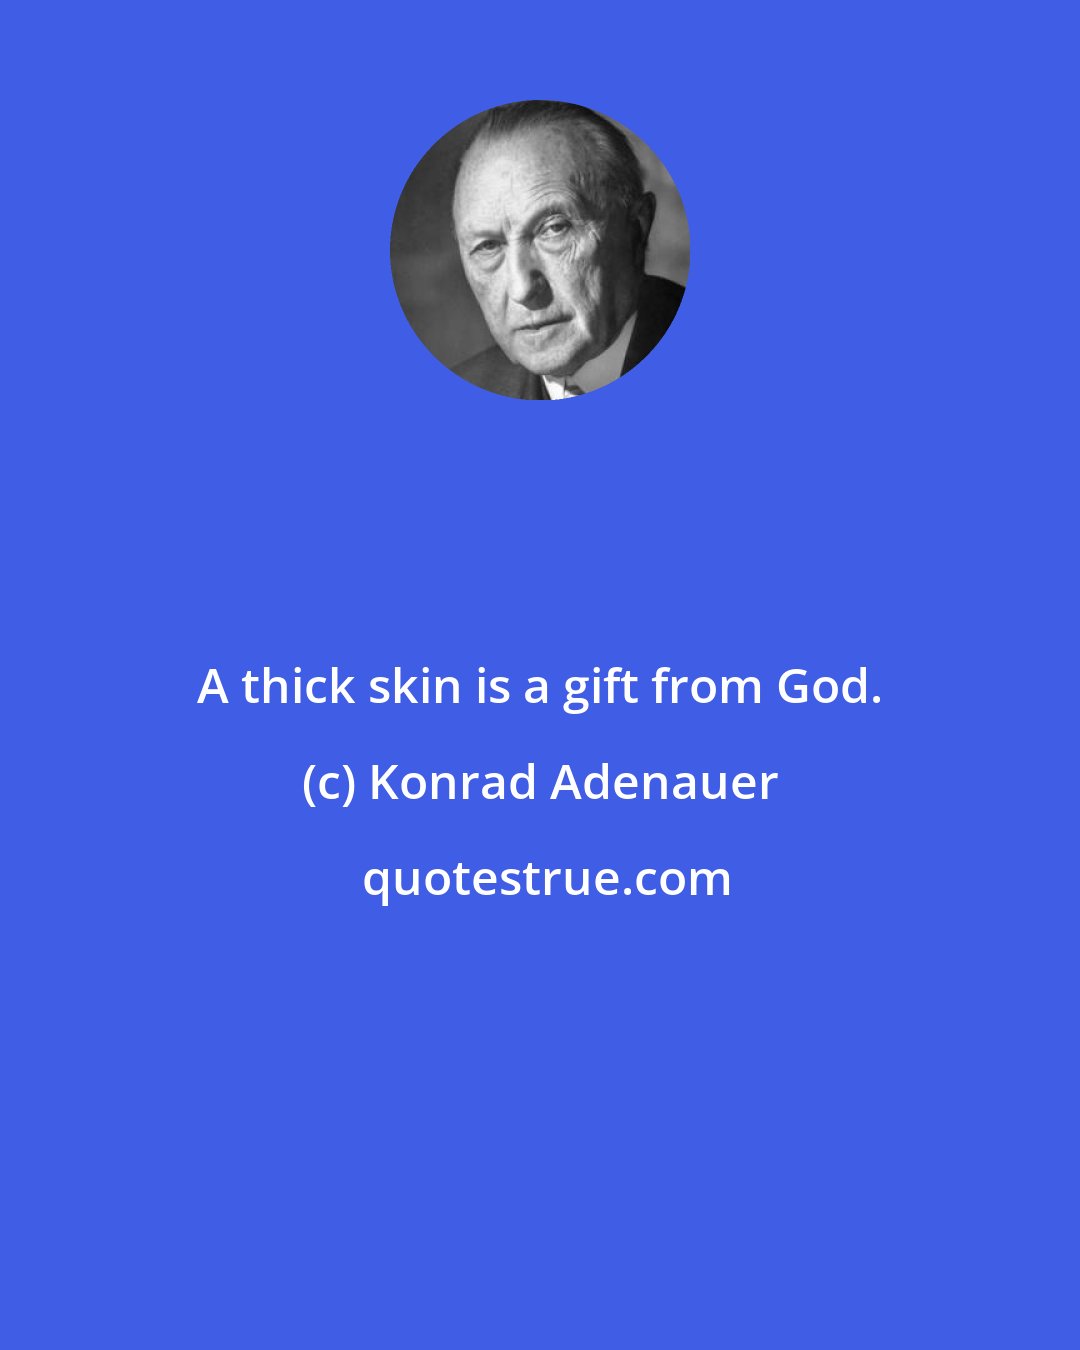 Konrad Adenauer: A thick skin is a gift from God.